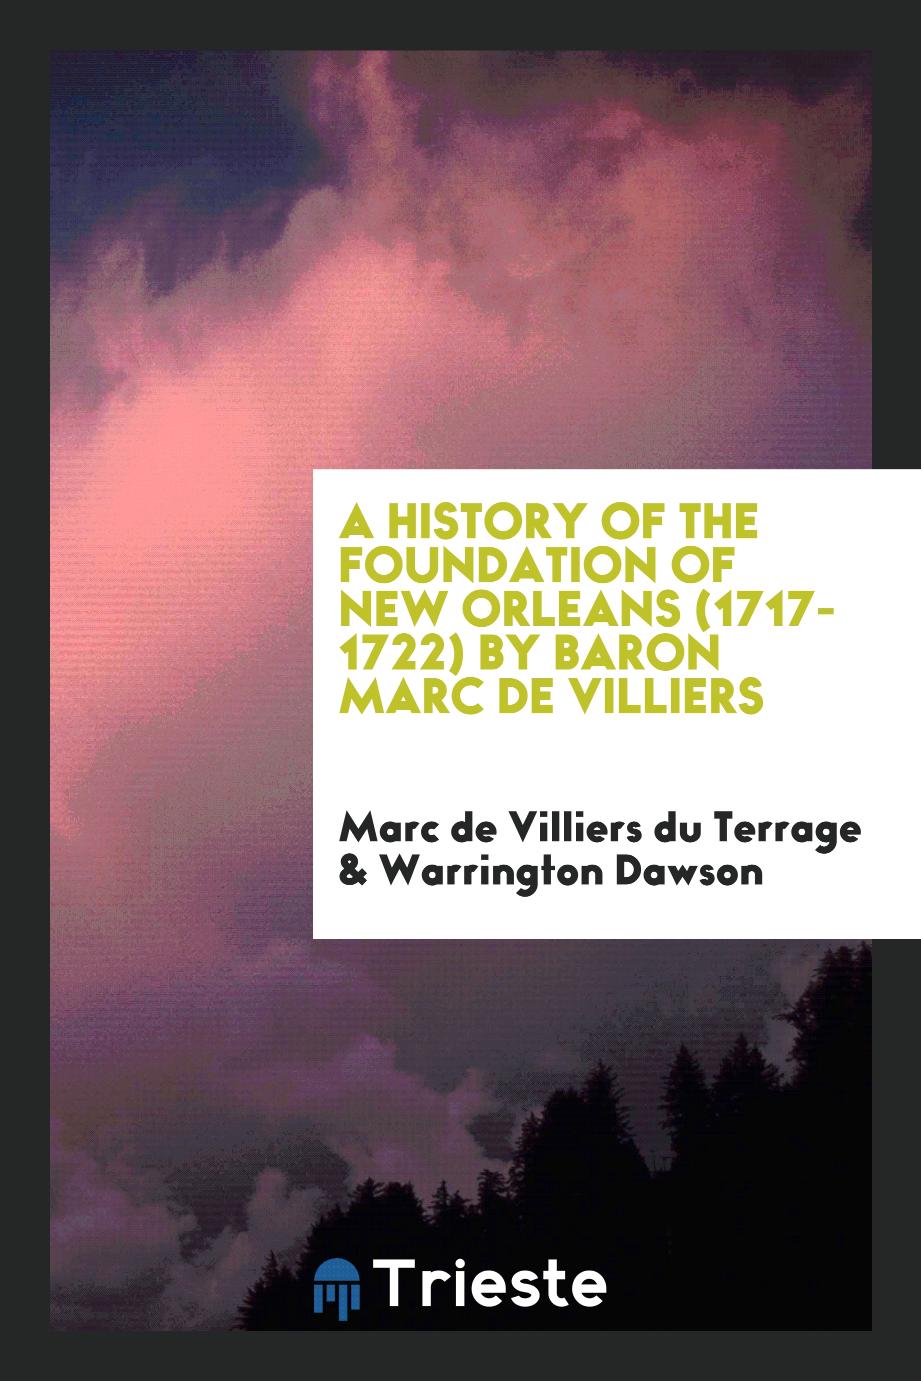 A history of the foundation of New Orleans (1717-1722) By Baron Marc de Villiers